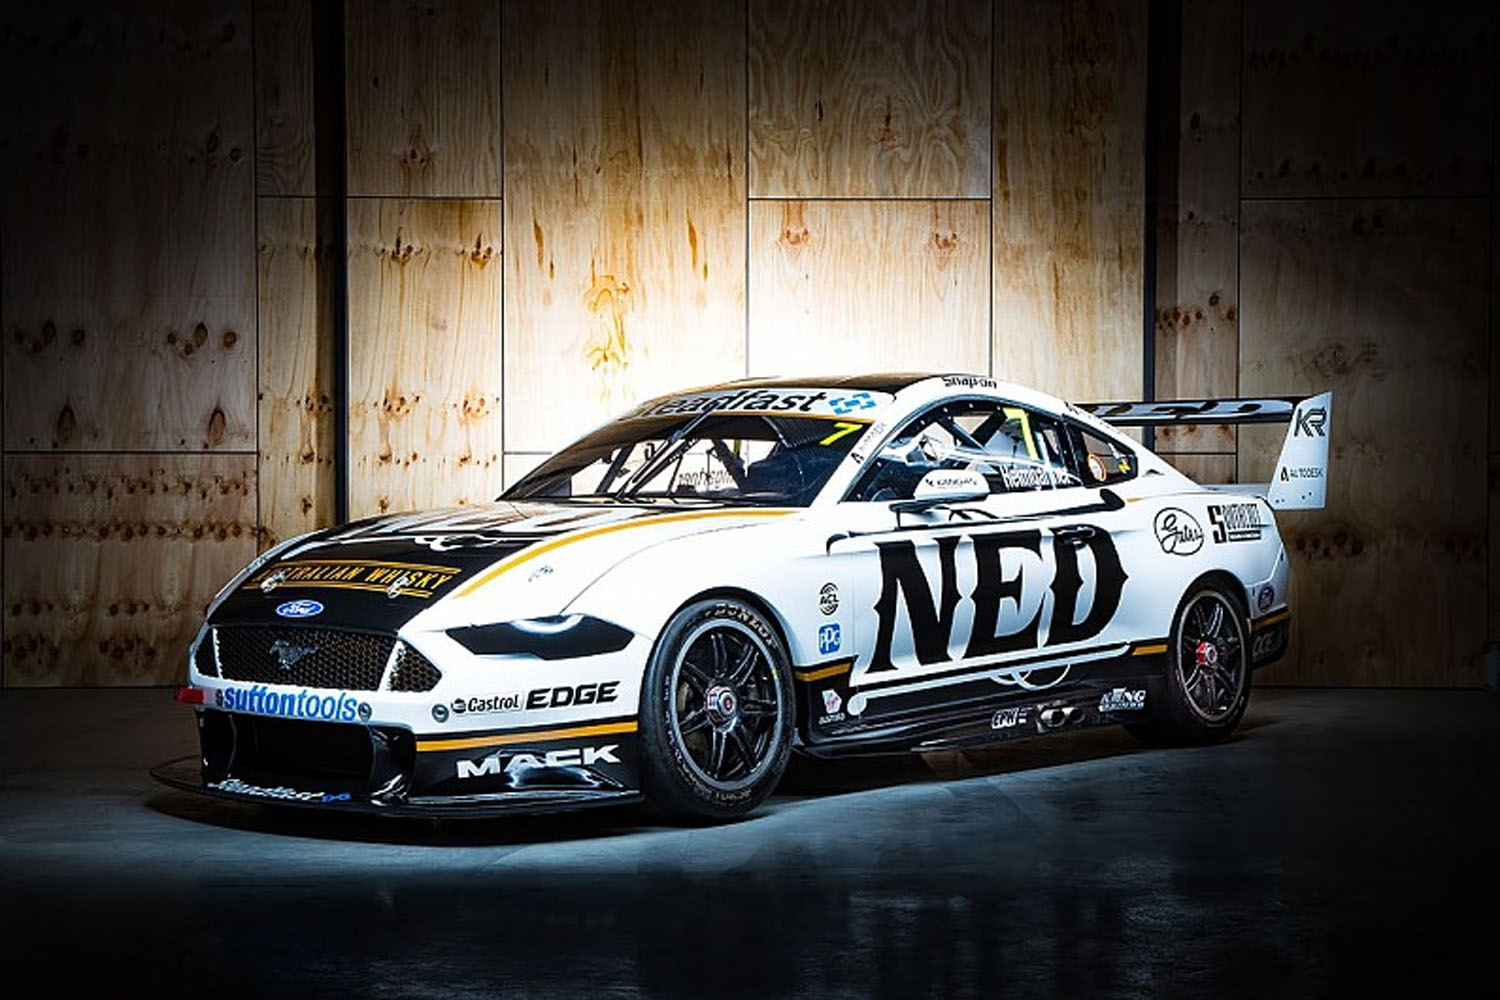 The Australian Supercars Ford Mustang Shook Up The Series